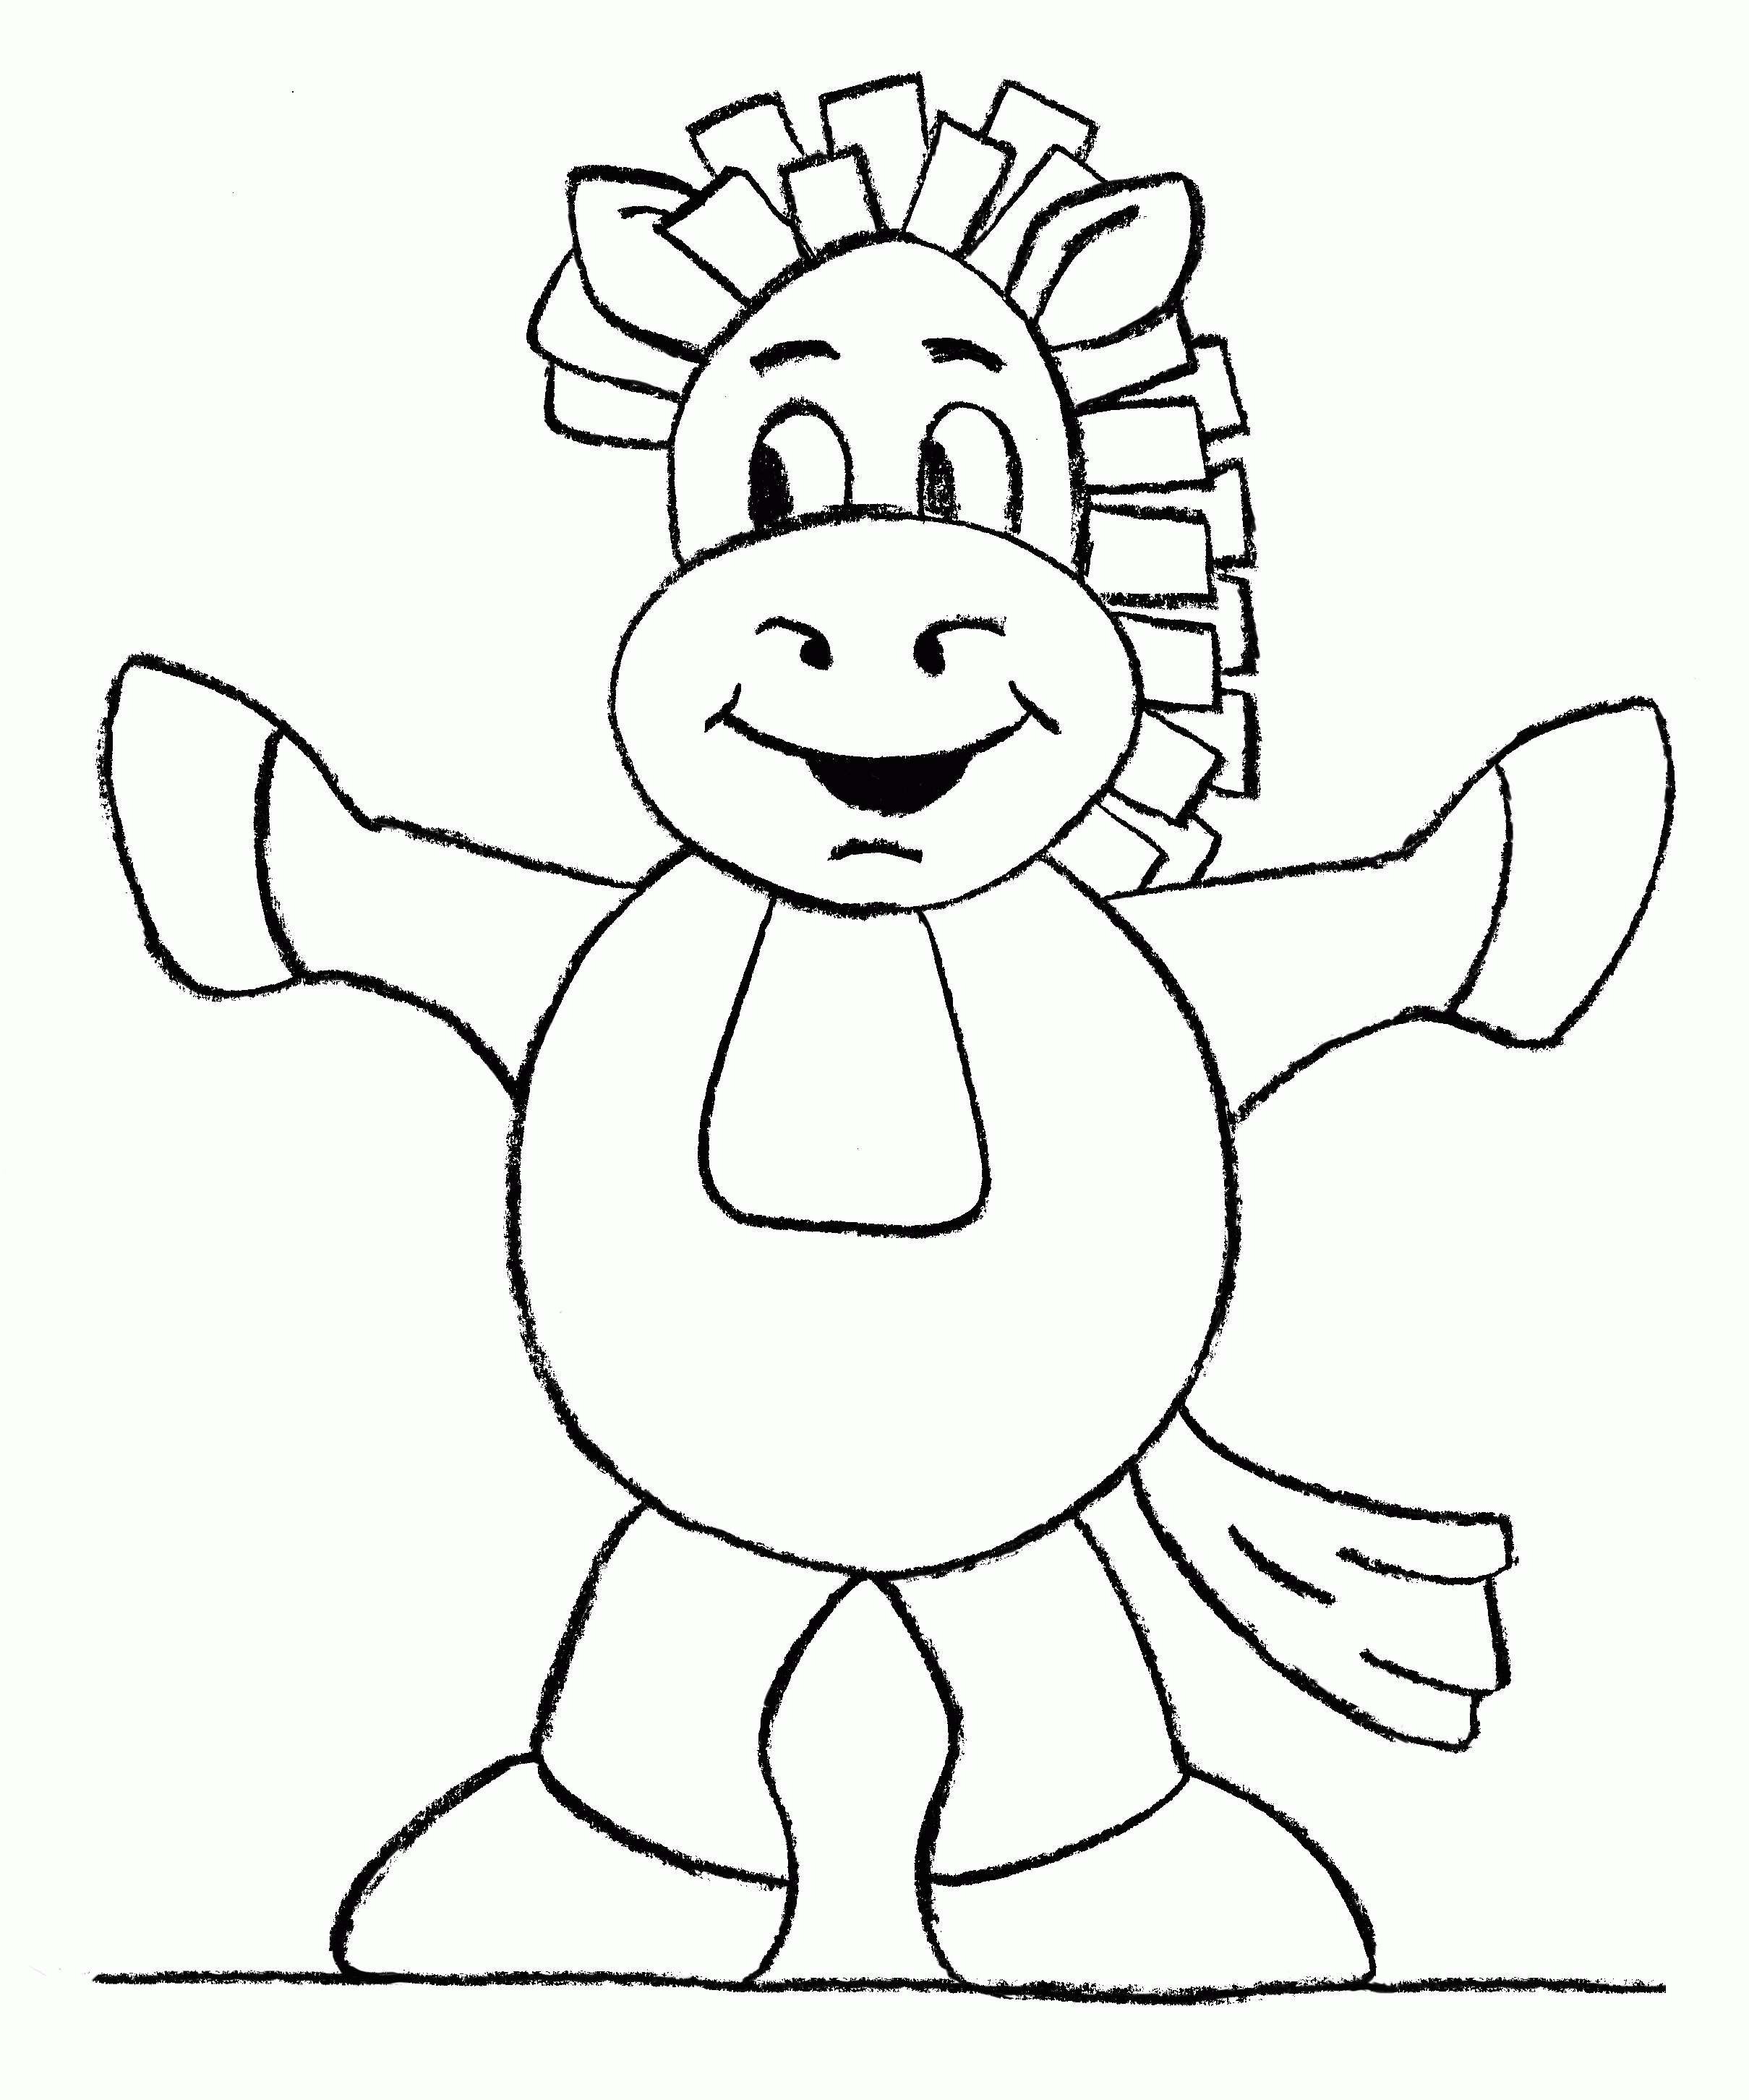 Ananse The Spider Coloring Pages - Coloring Pages For All Ages